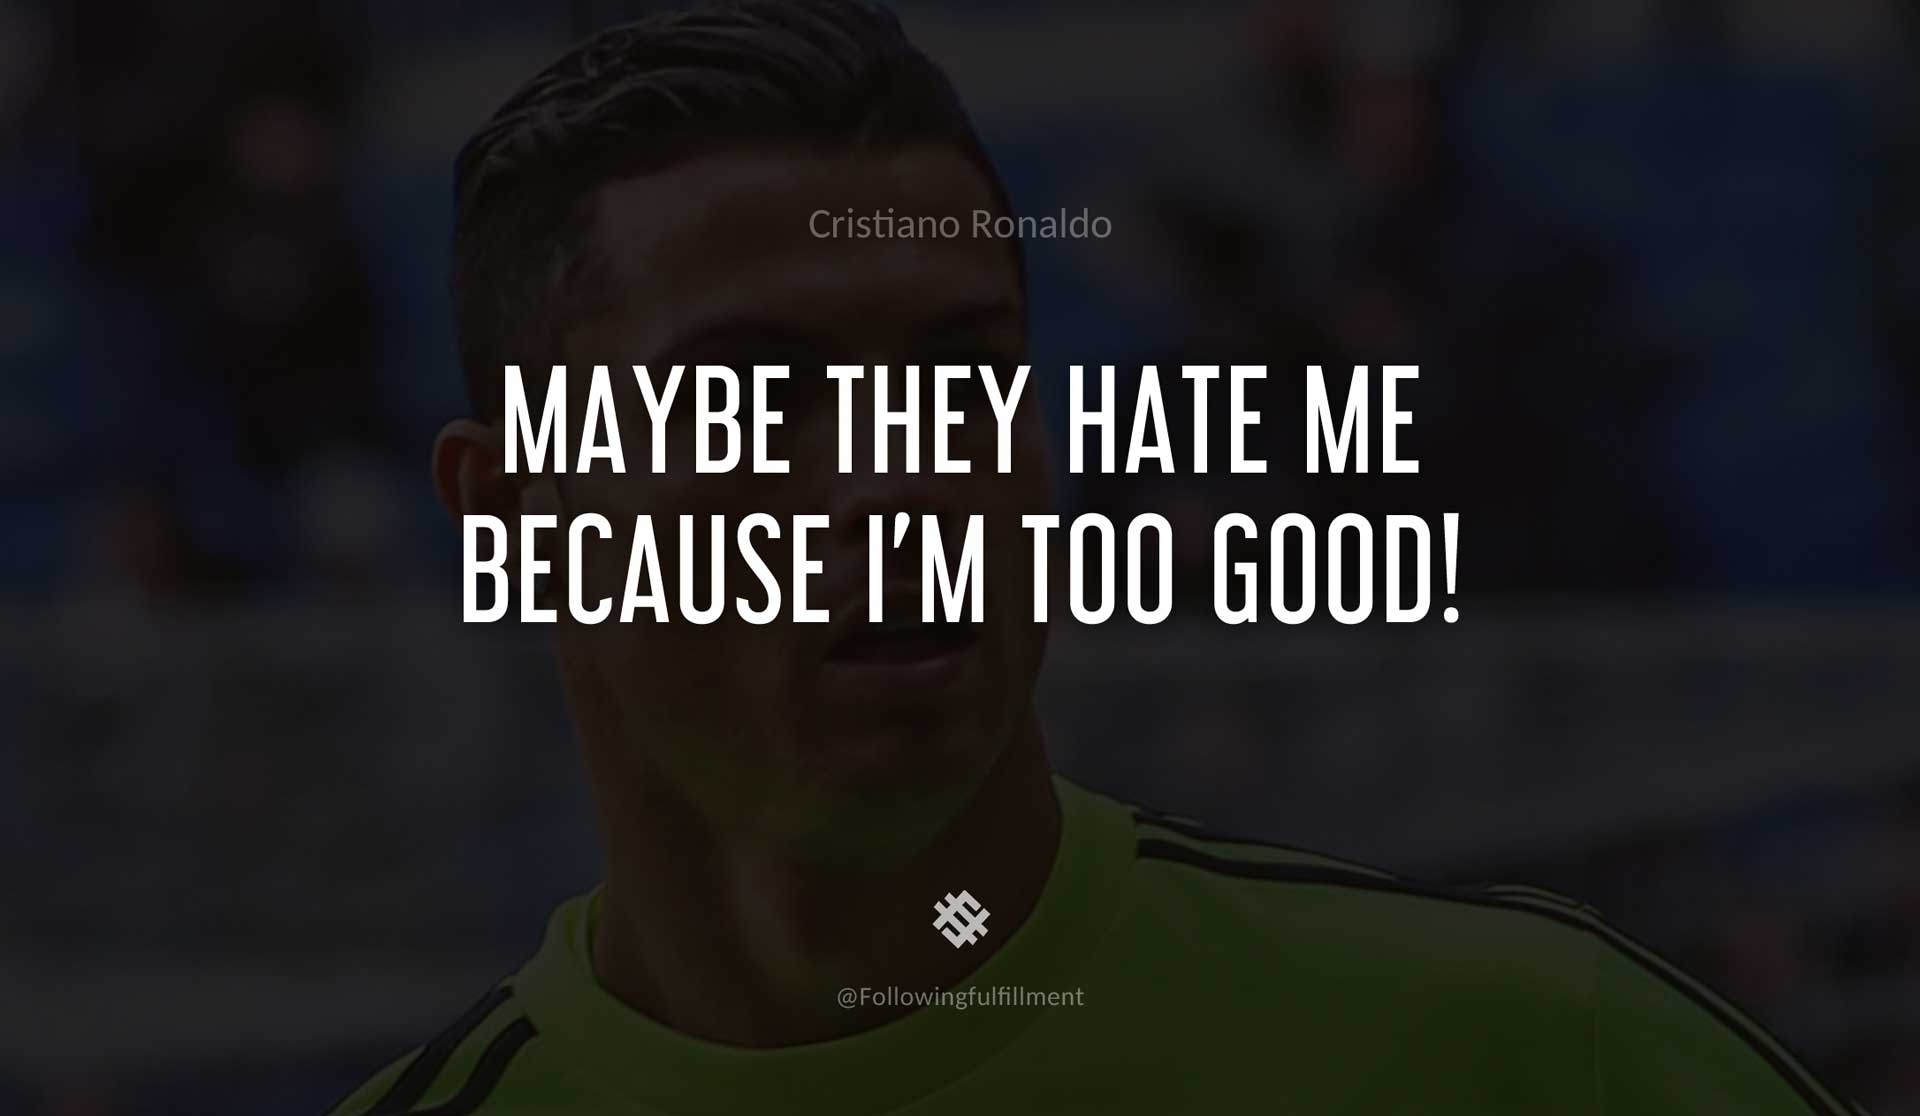 Maybe-they-hate-me-because-I'm-too-good!-CRISTIANO-RONALDO-Quote.jpg